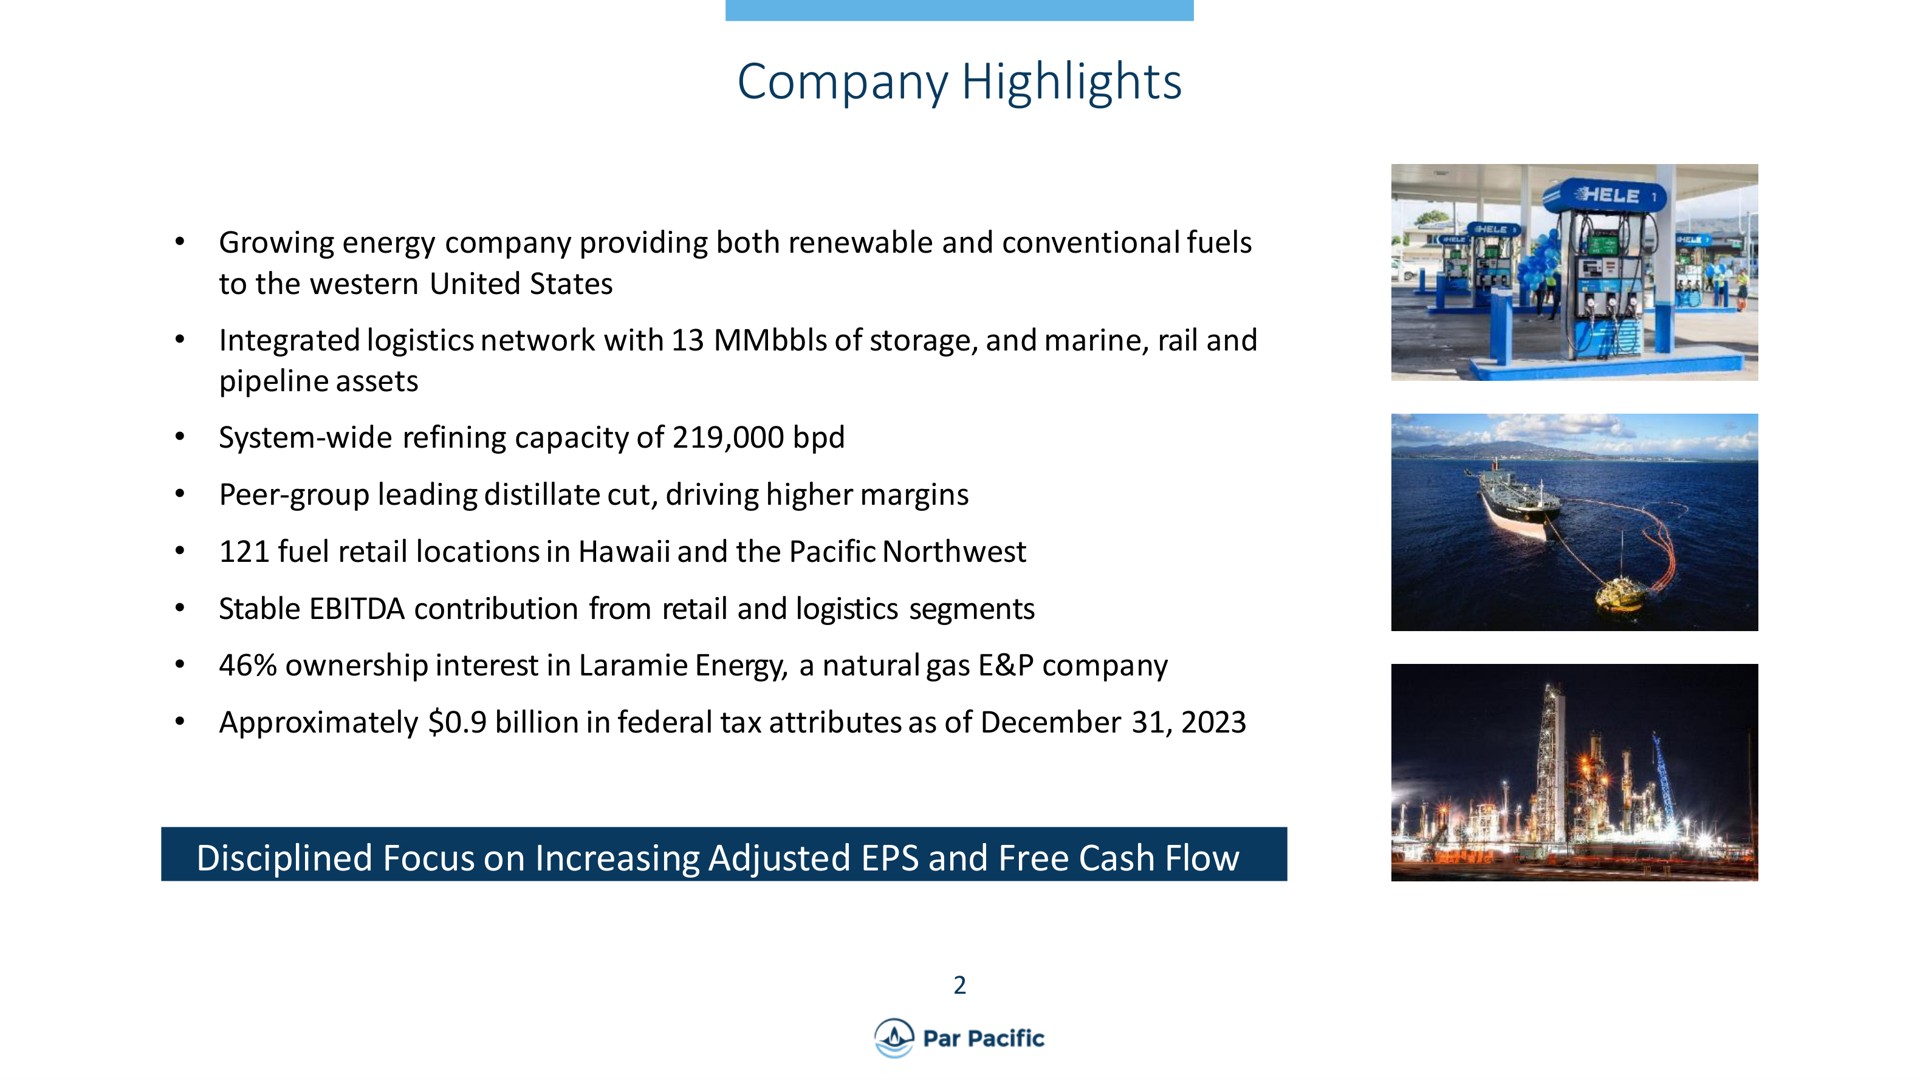 company highlights disciplined focus on increasing adjusted and free cash flow | Par Pacific